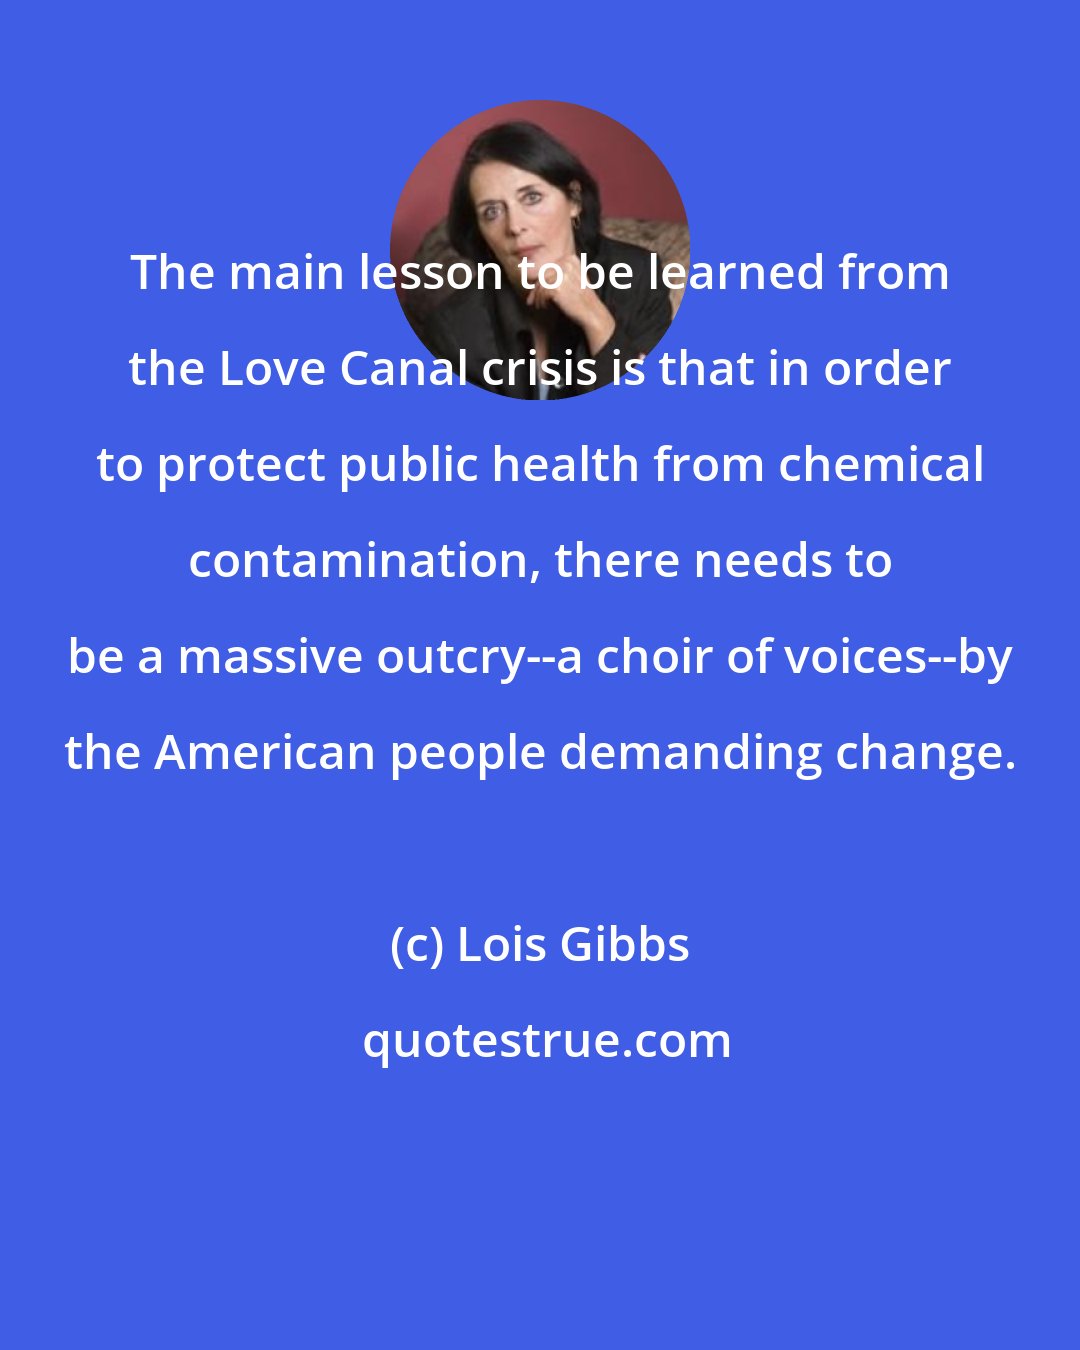 Lois Gibbs: The main lesson to be learned from the Love Canal crisis is that in order to protect public health from chemical contamination, there needs to be a massive outcry--a choir of voices--by the American people demanding change.